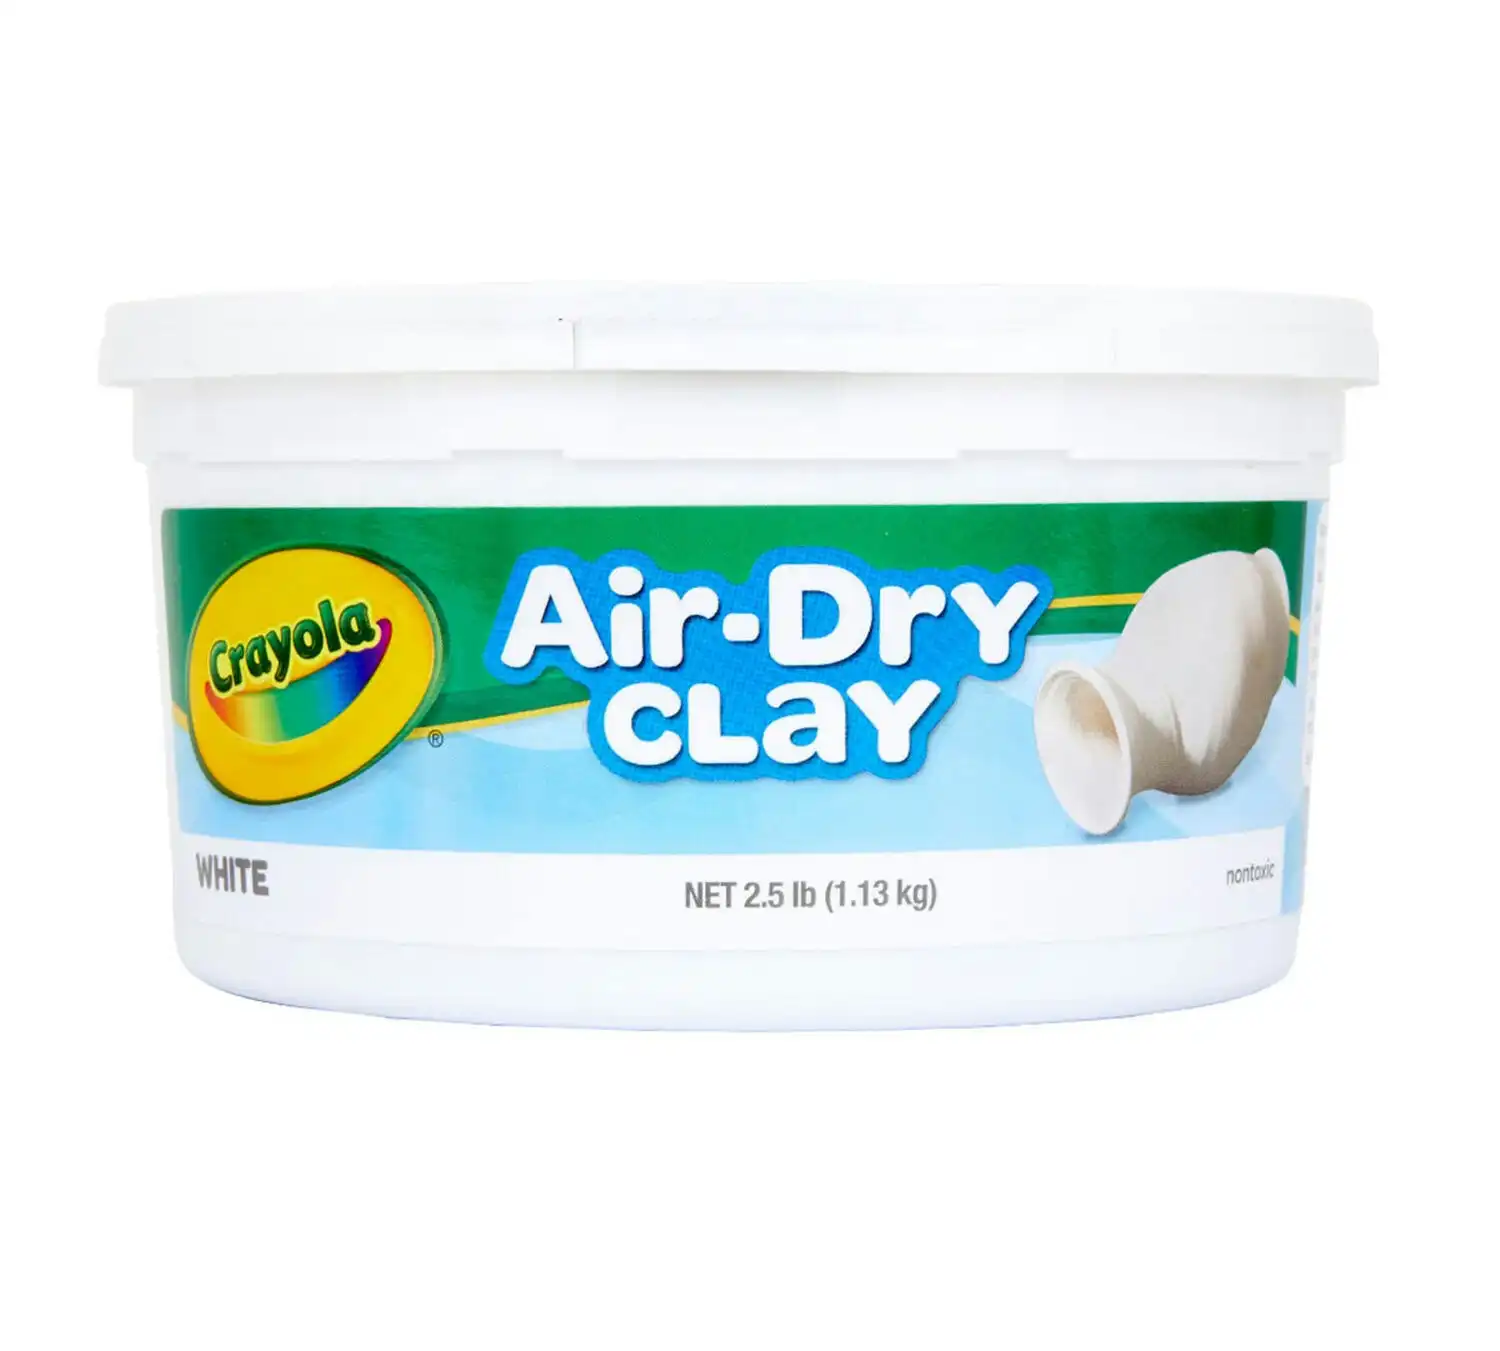 Crayola - White Air Dry Clay 1.3kg Resealable Bucket